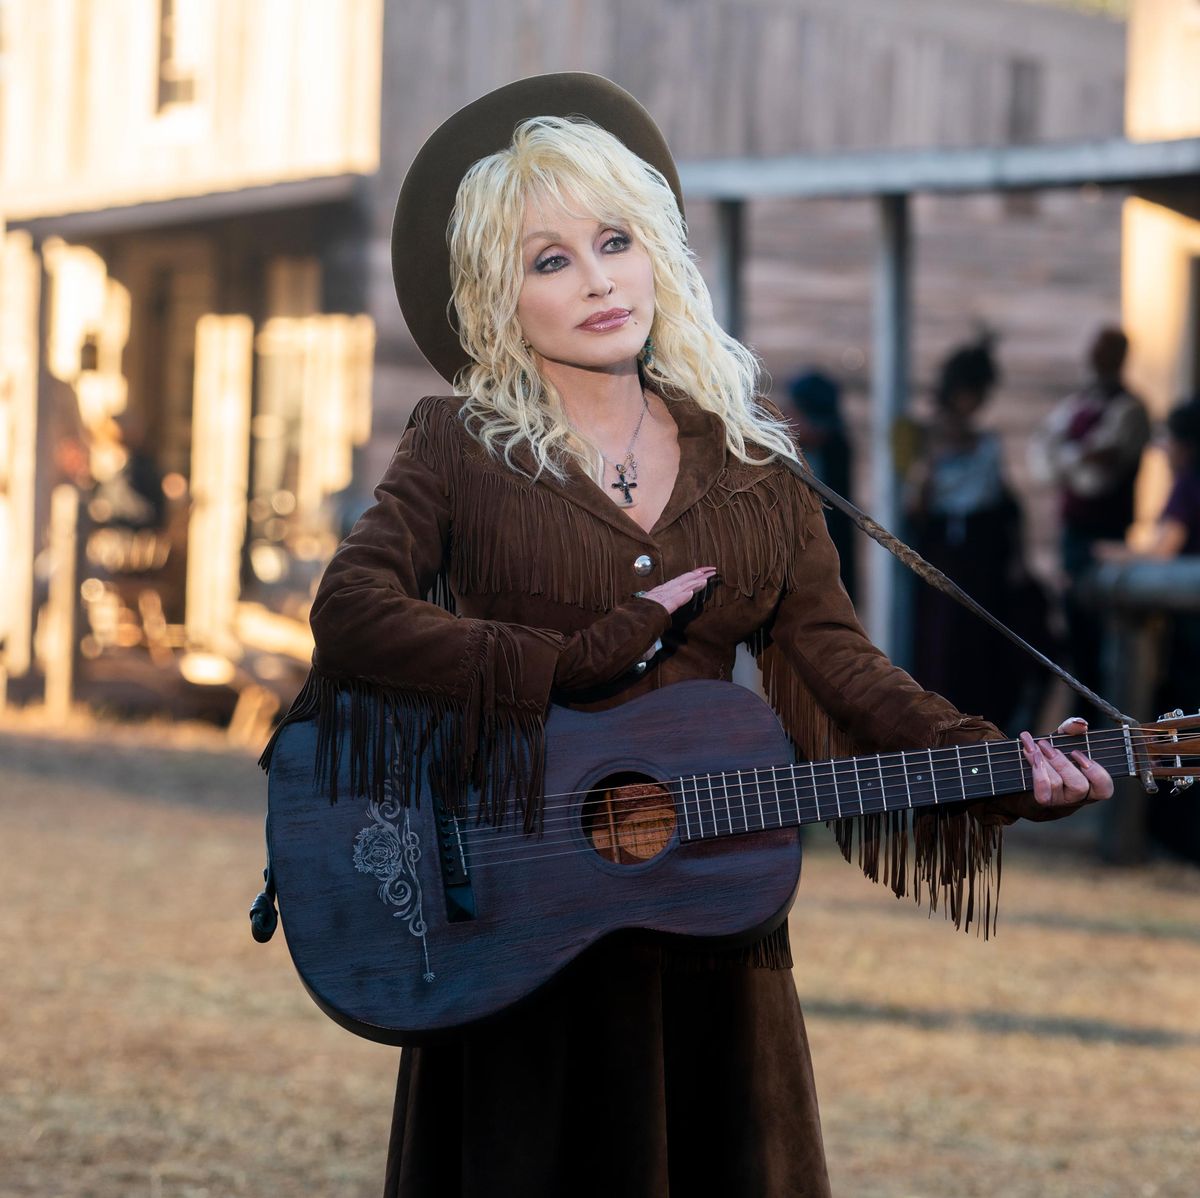 From Dolly Parton to Beyoncé: A love letter to divas